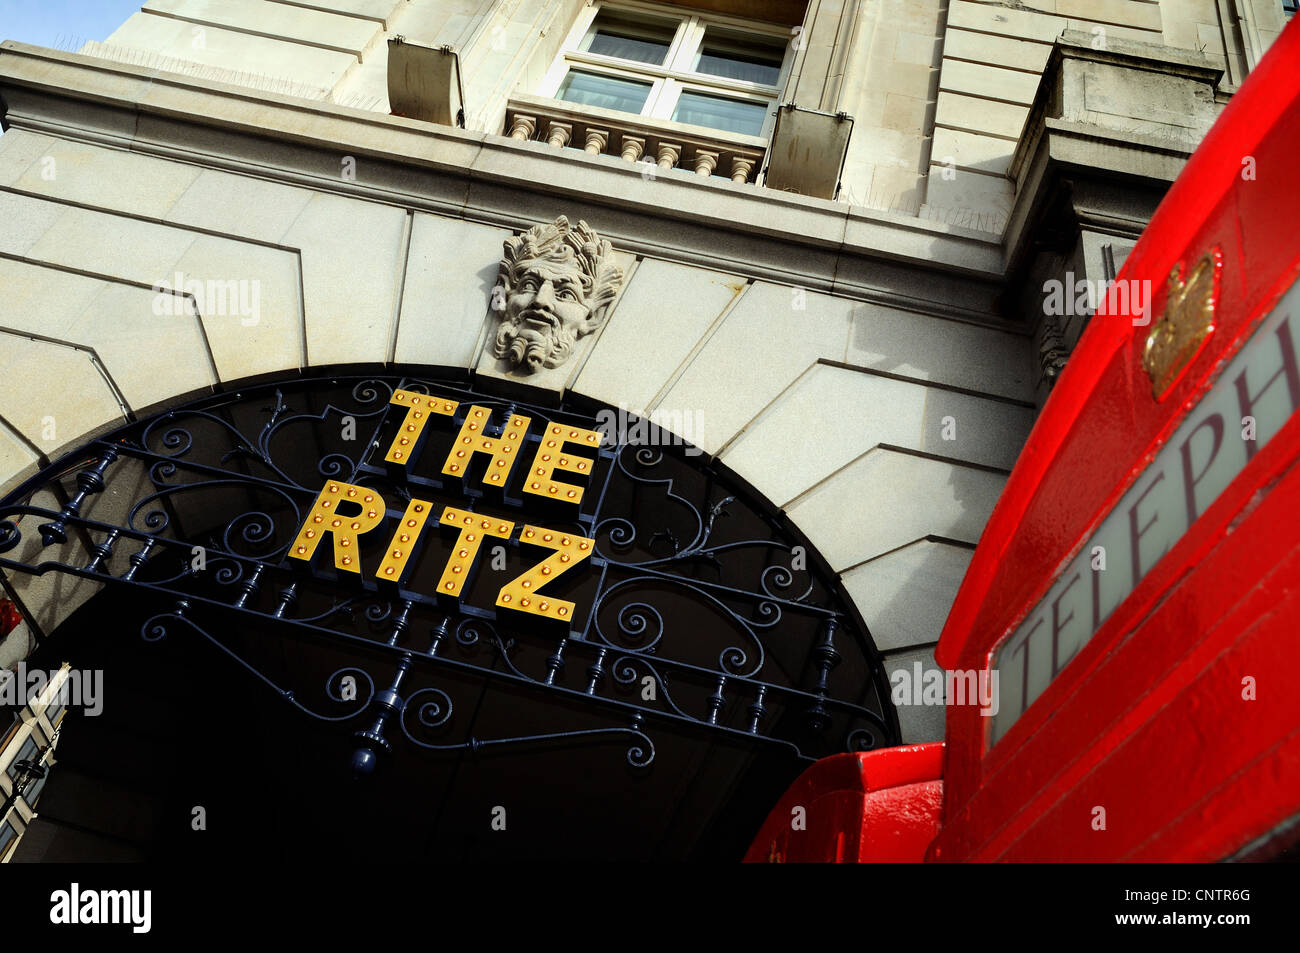 Exterior of The Ritz hotel Piccadilly, London Stock Photo